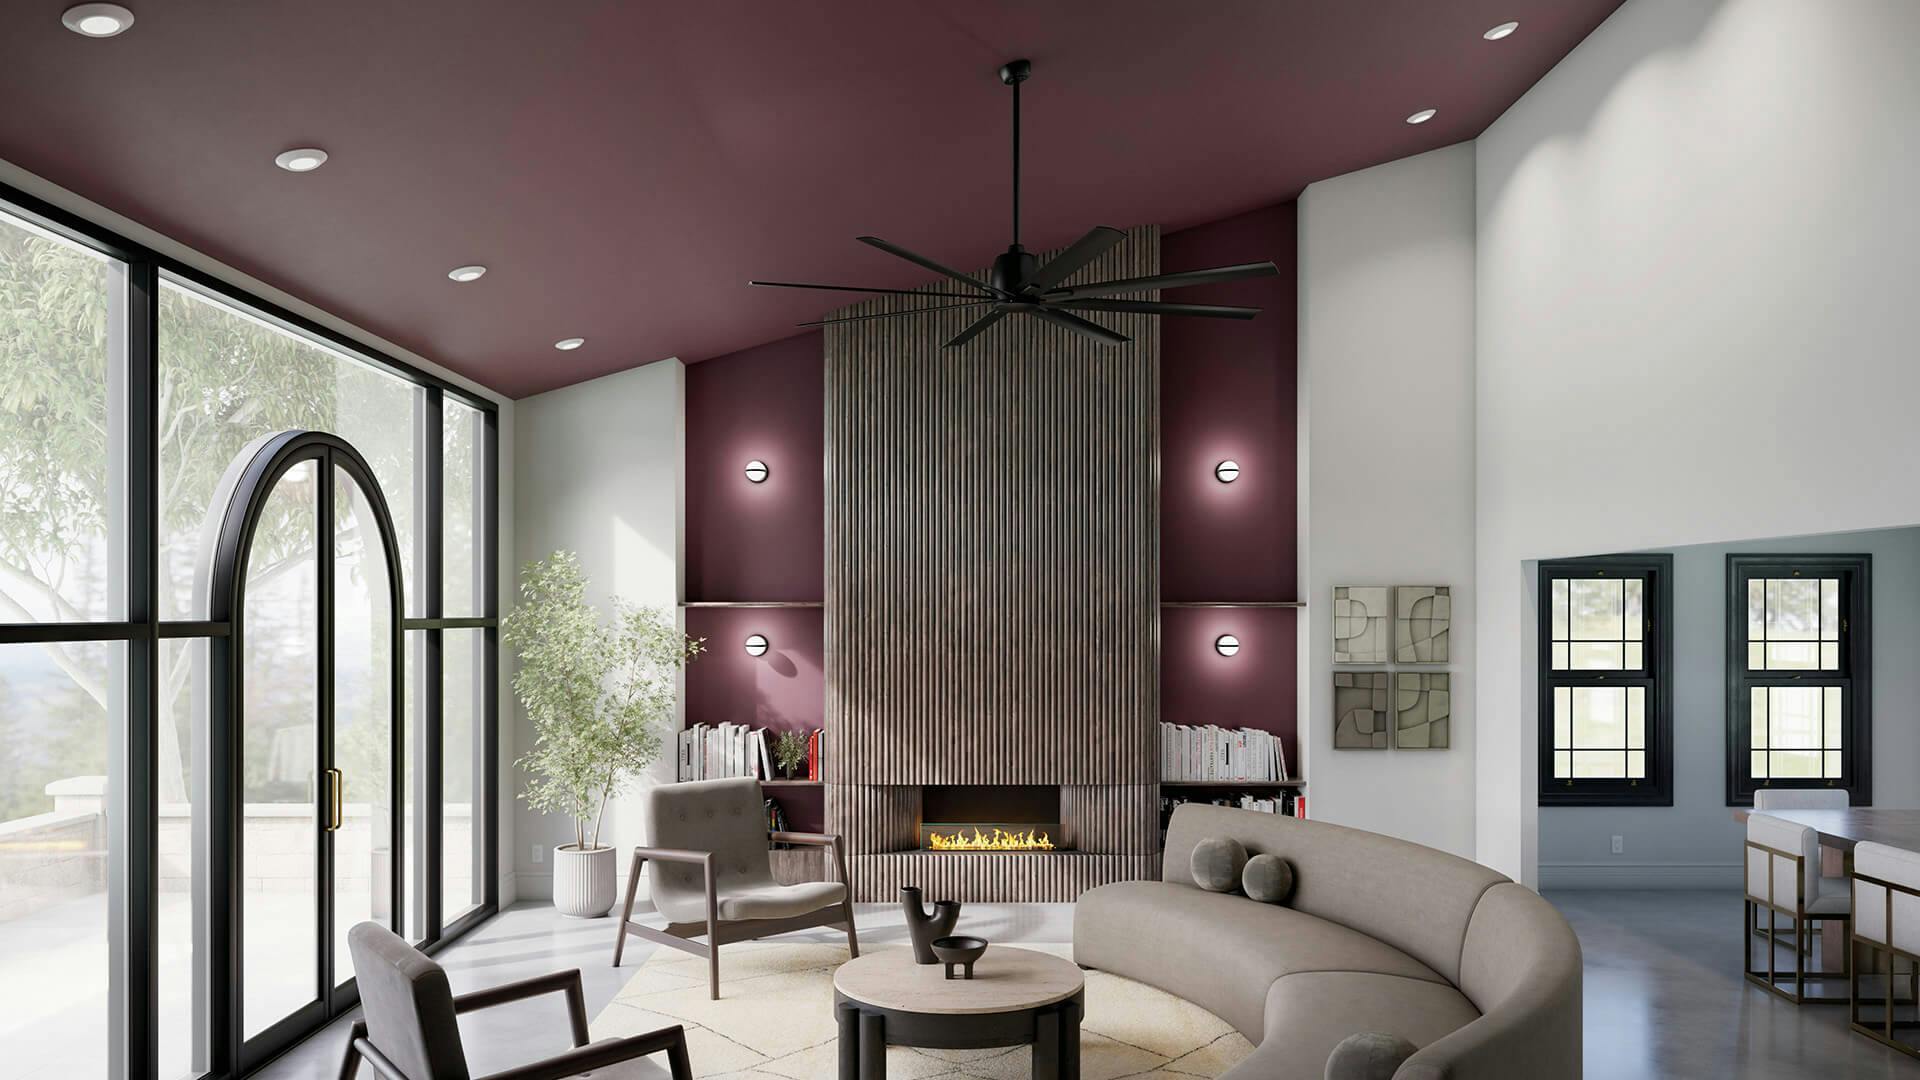 Large living room with mauve ceiling and wall panels with a fireplace featuring a breda ceiling fan.